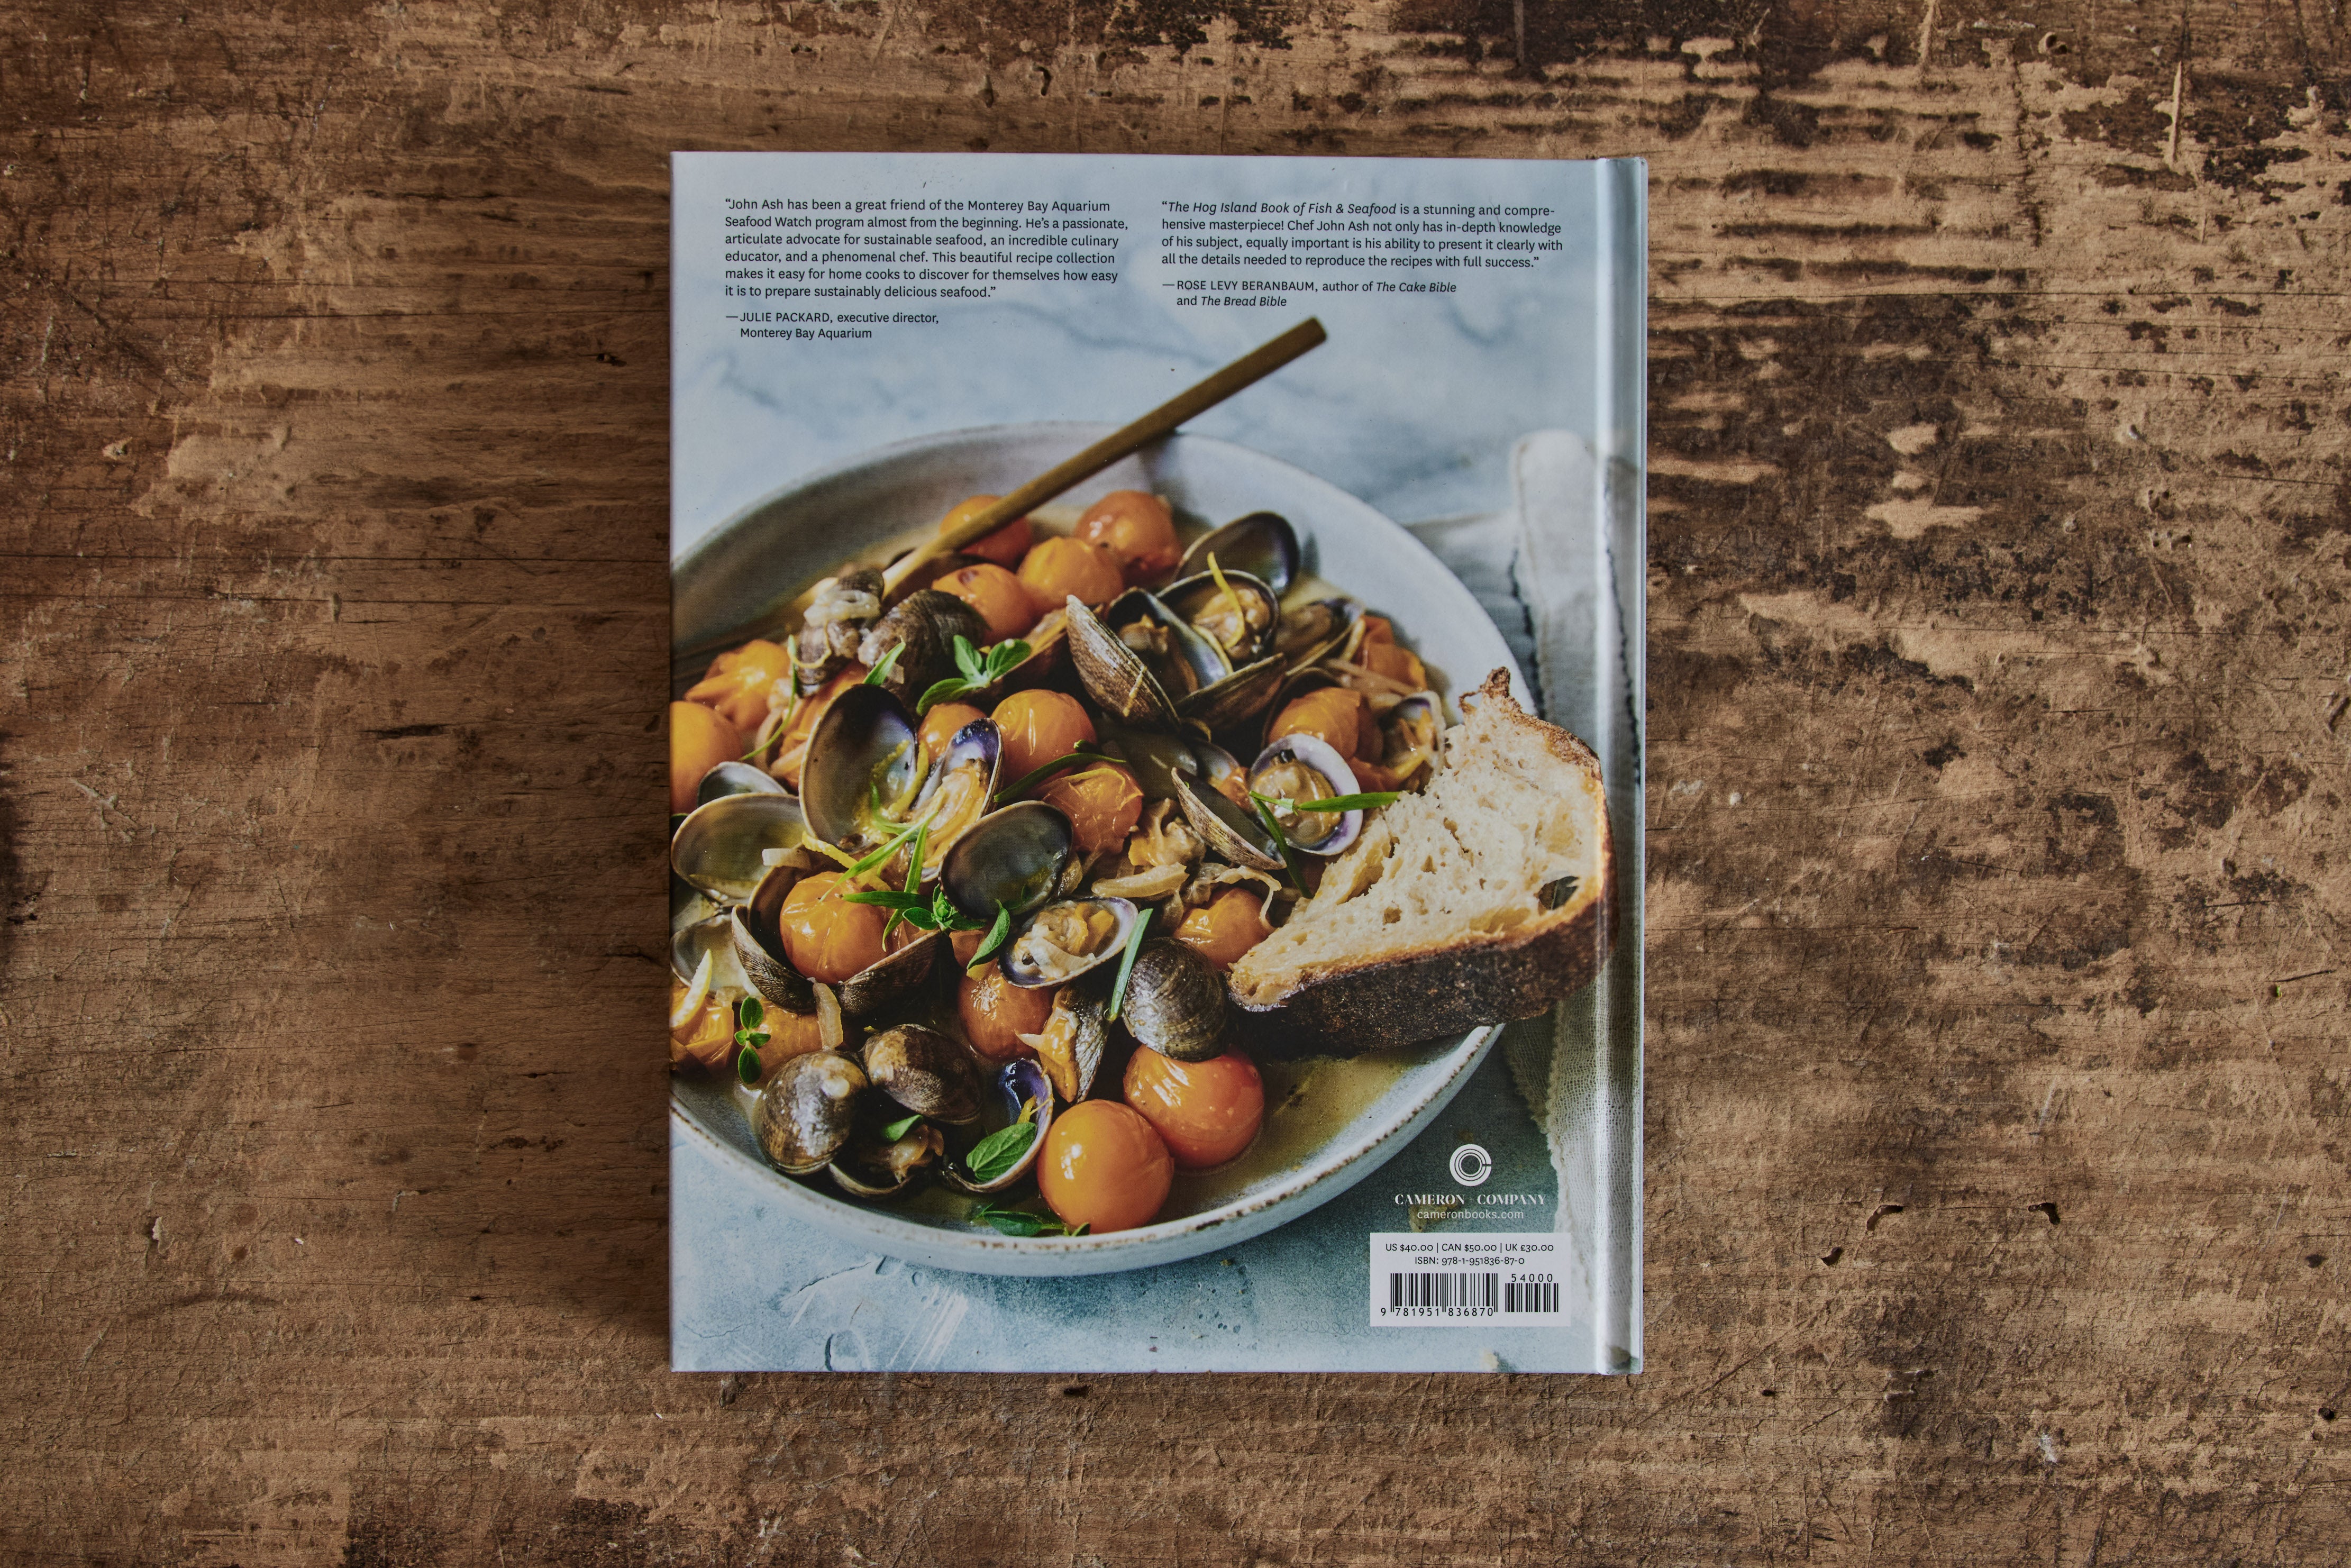 The Hog Island Book of Fish & Seafood: Culinary Treasures from Our Waters